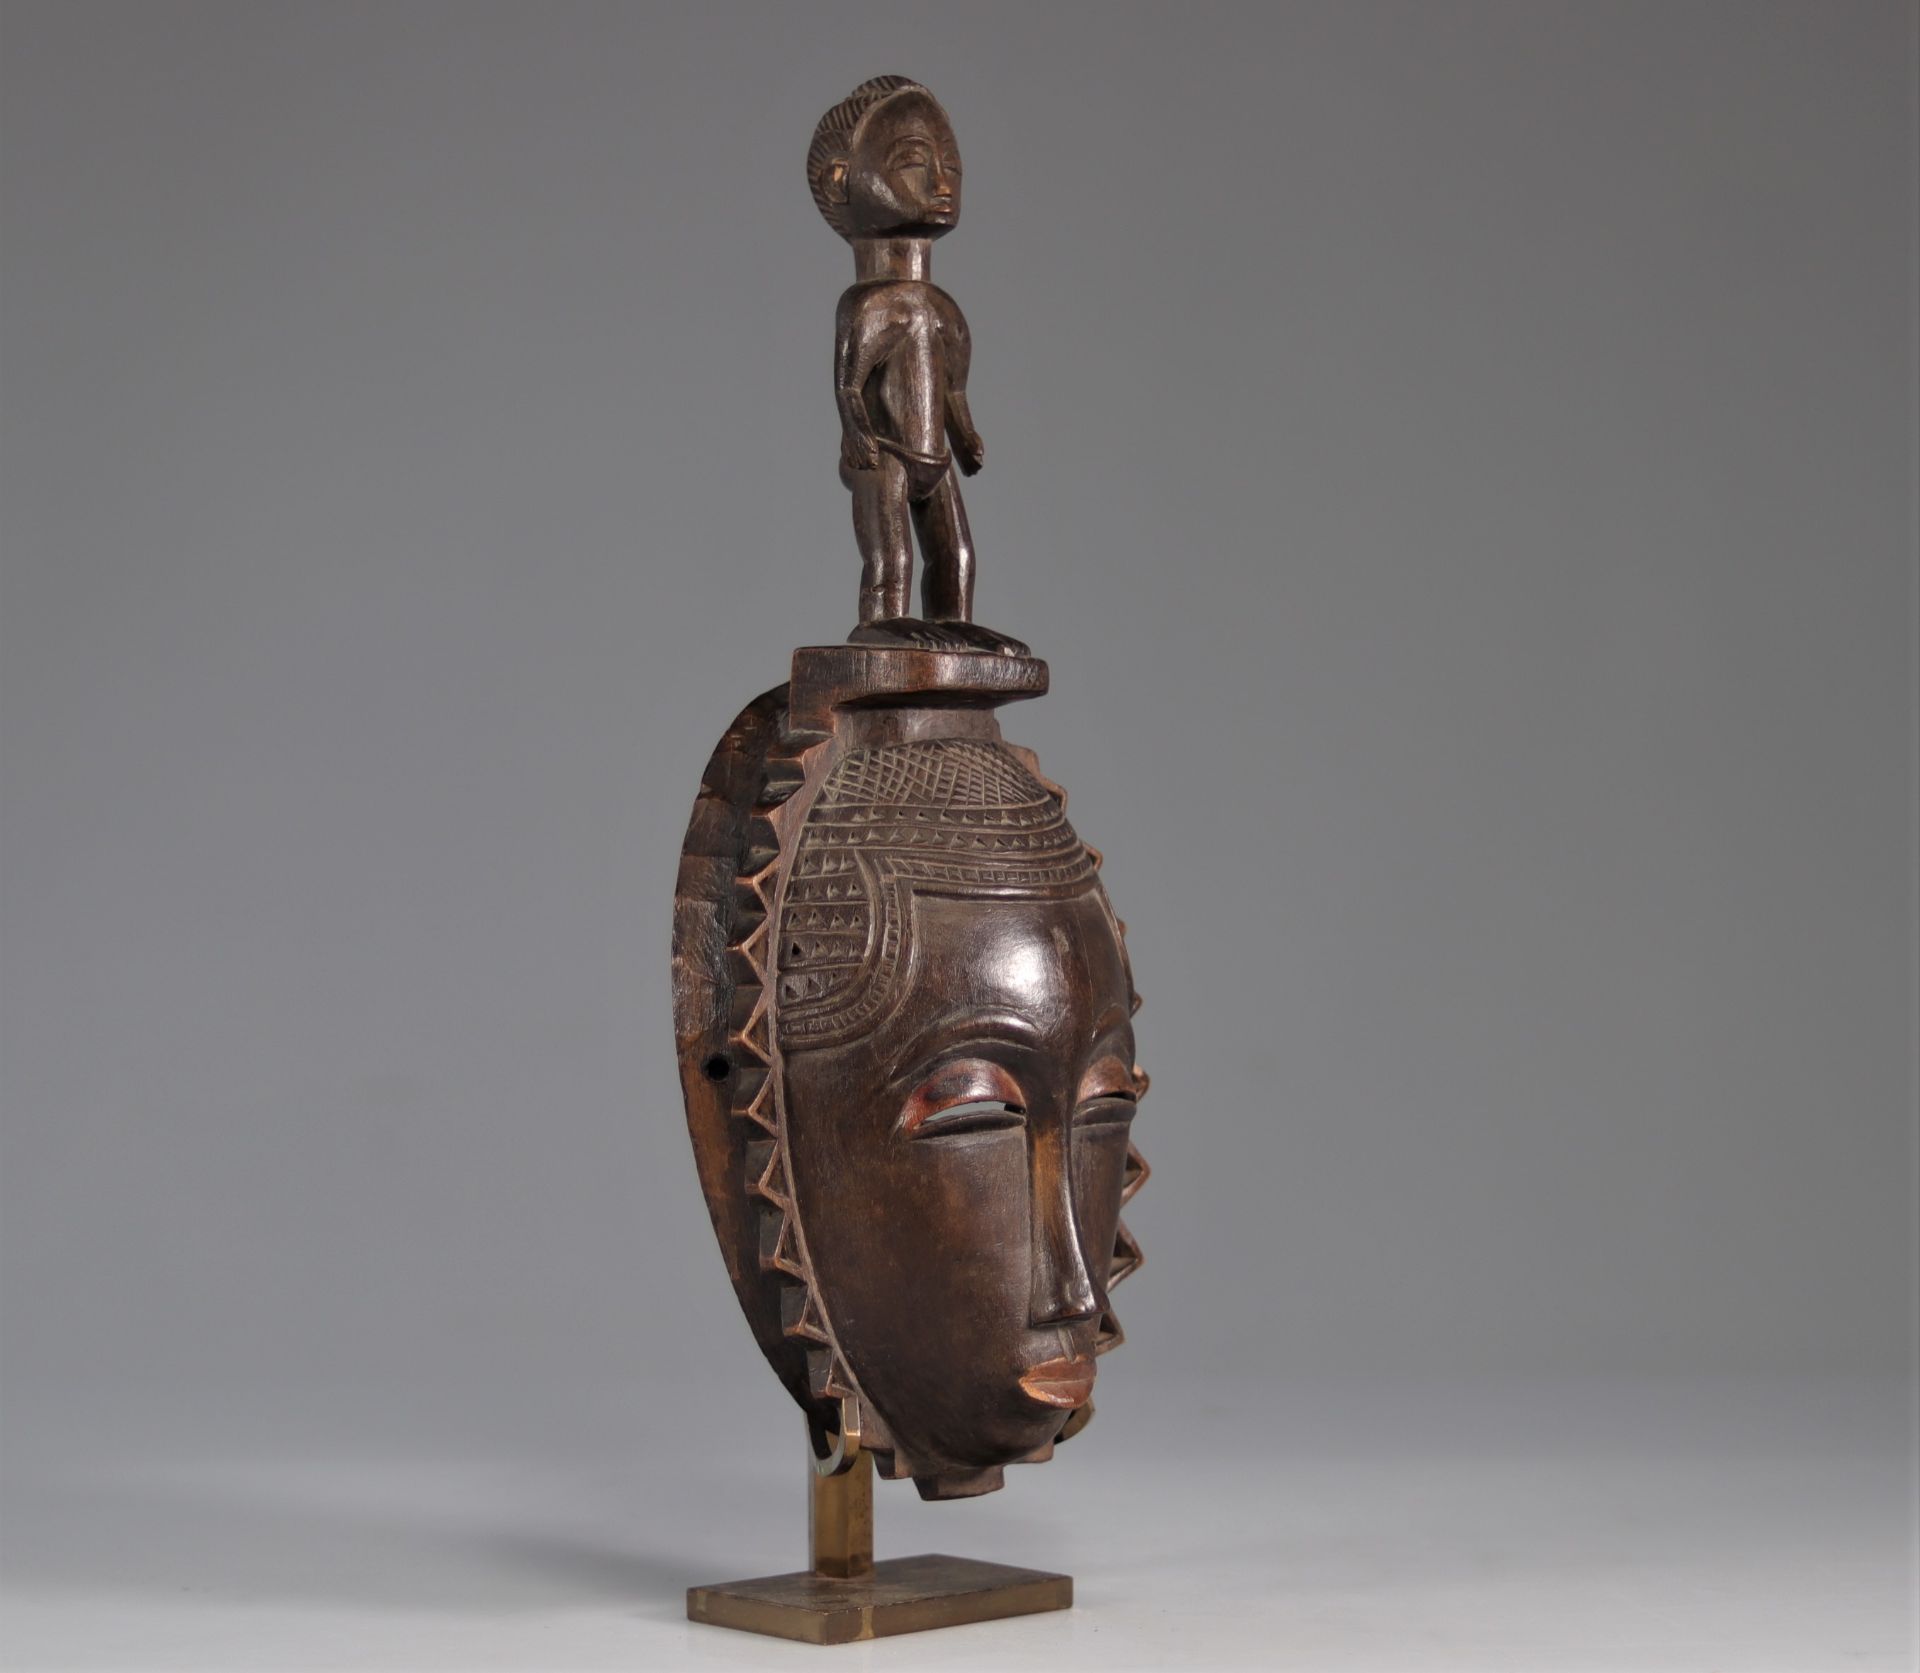 Baoule mask decorated with a character